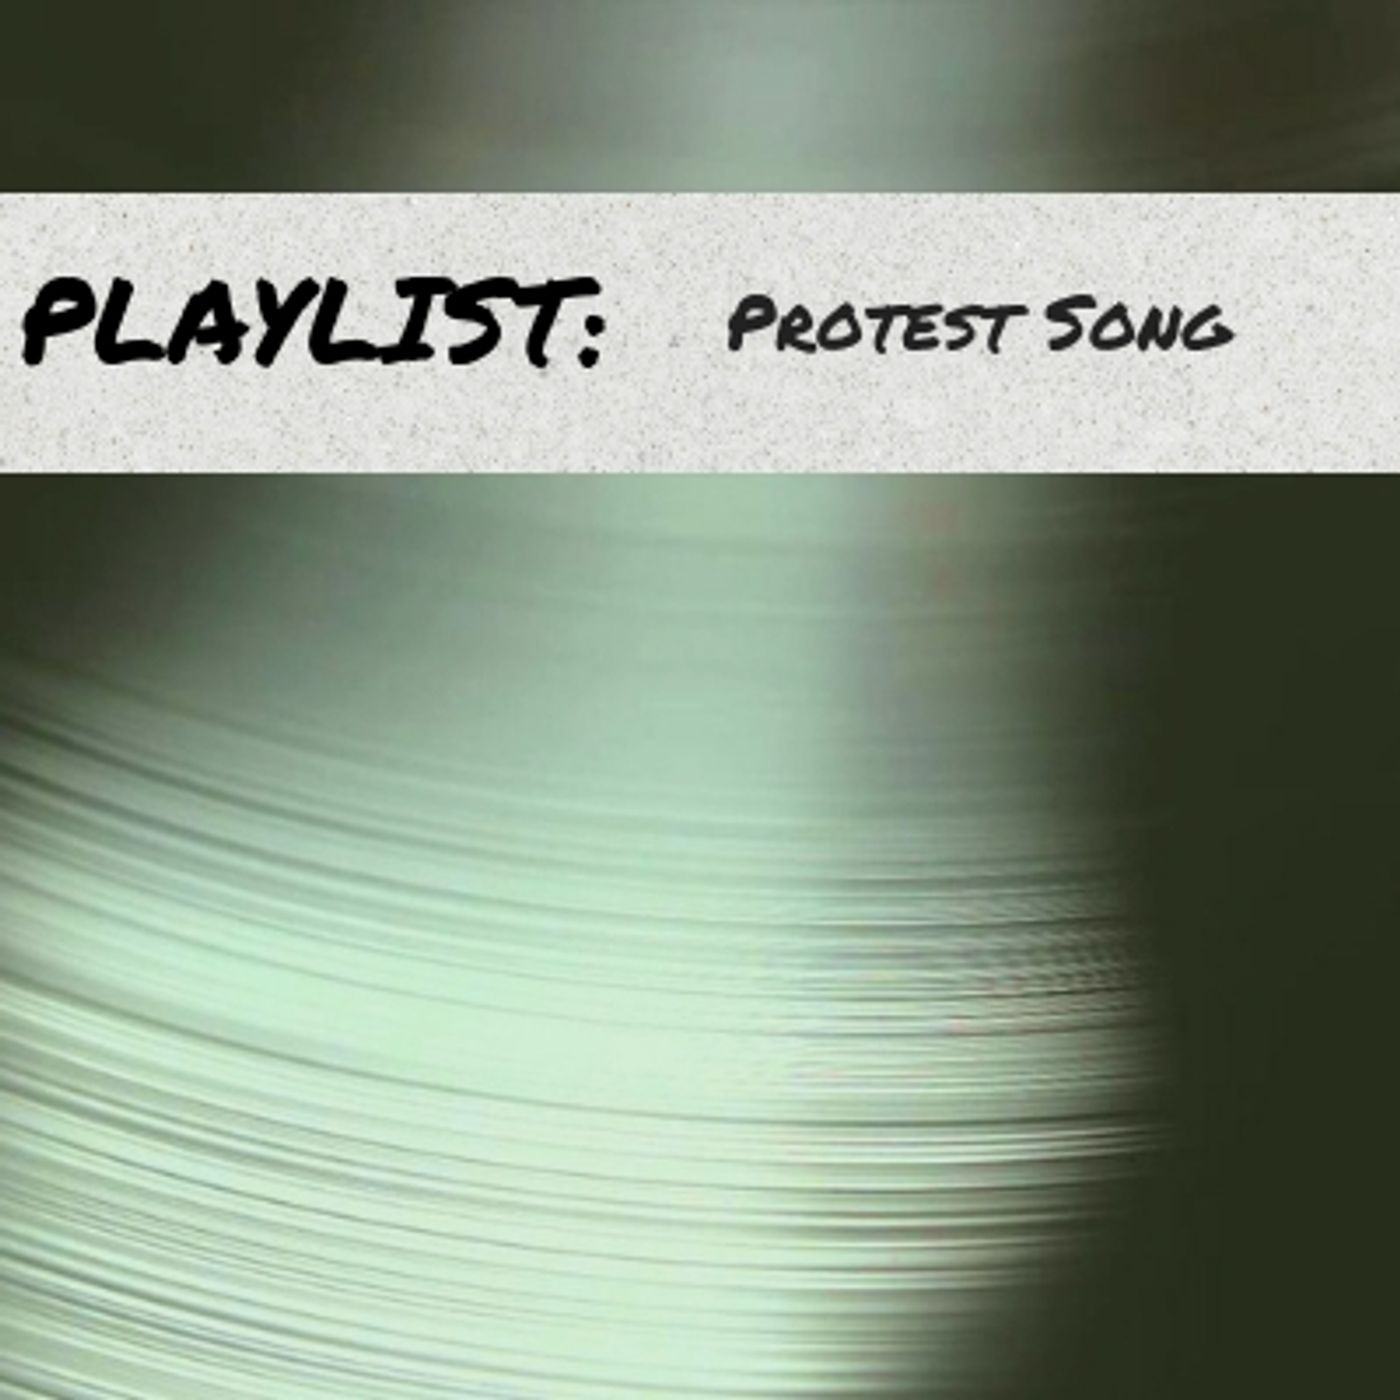 5.9 Protest Song